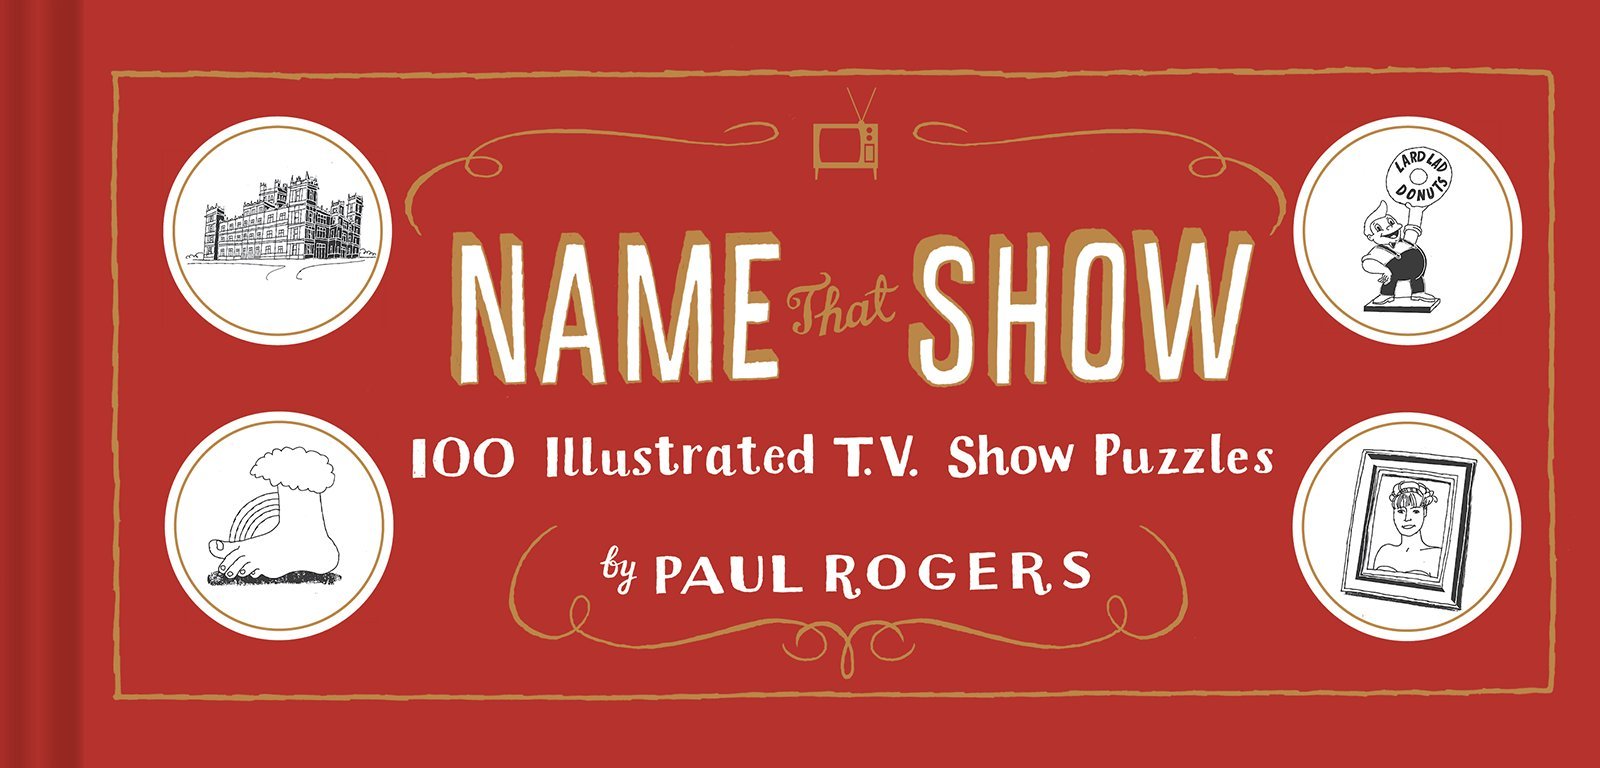 Name That Show - 100 Illustrated TV Puzzles | Paul Rogers